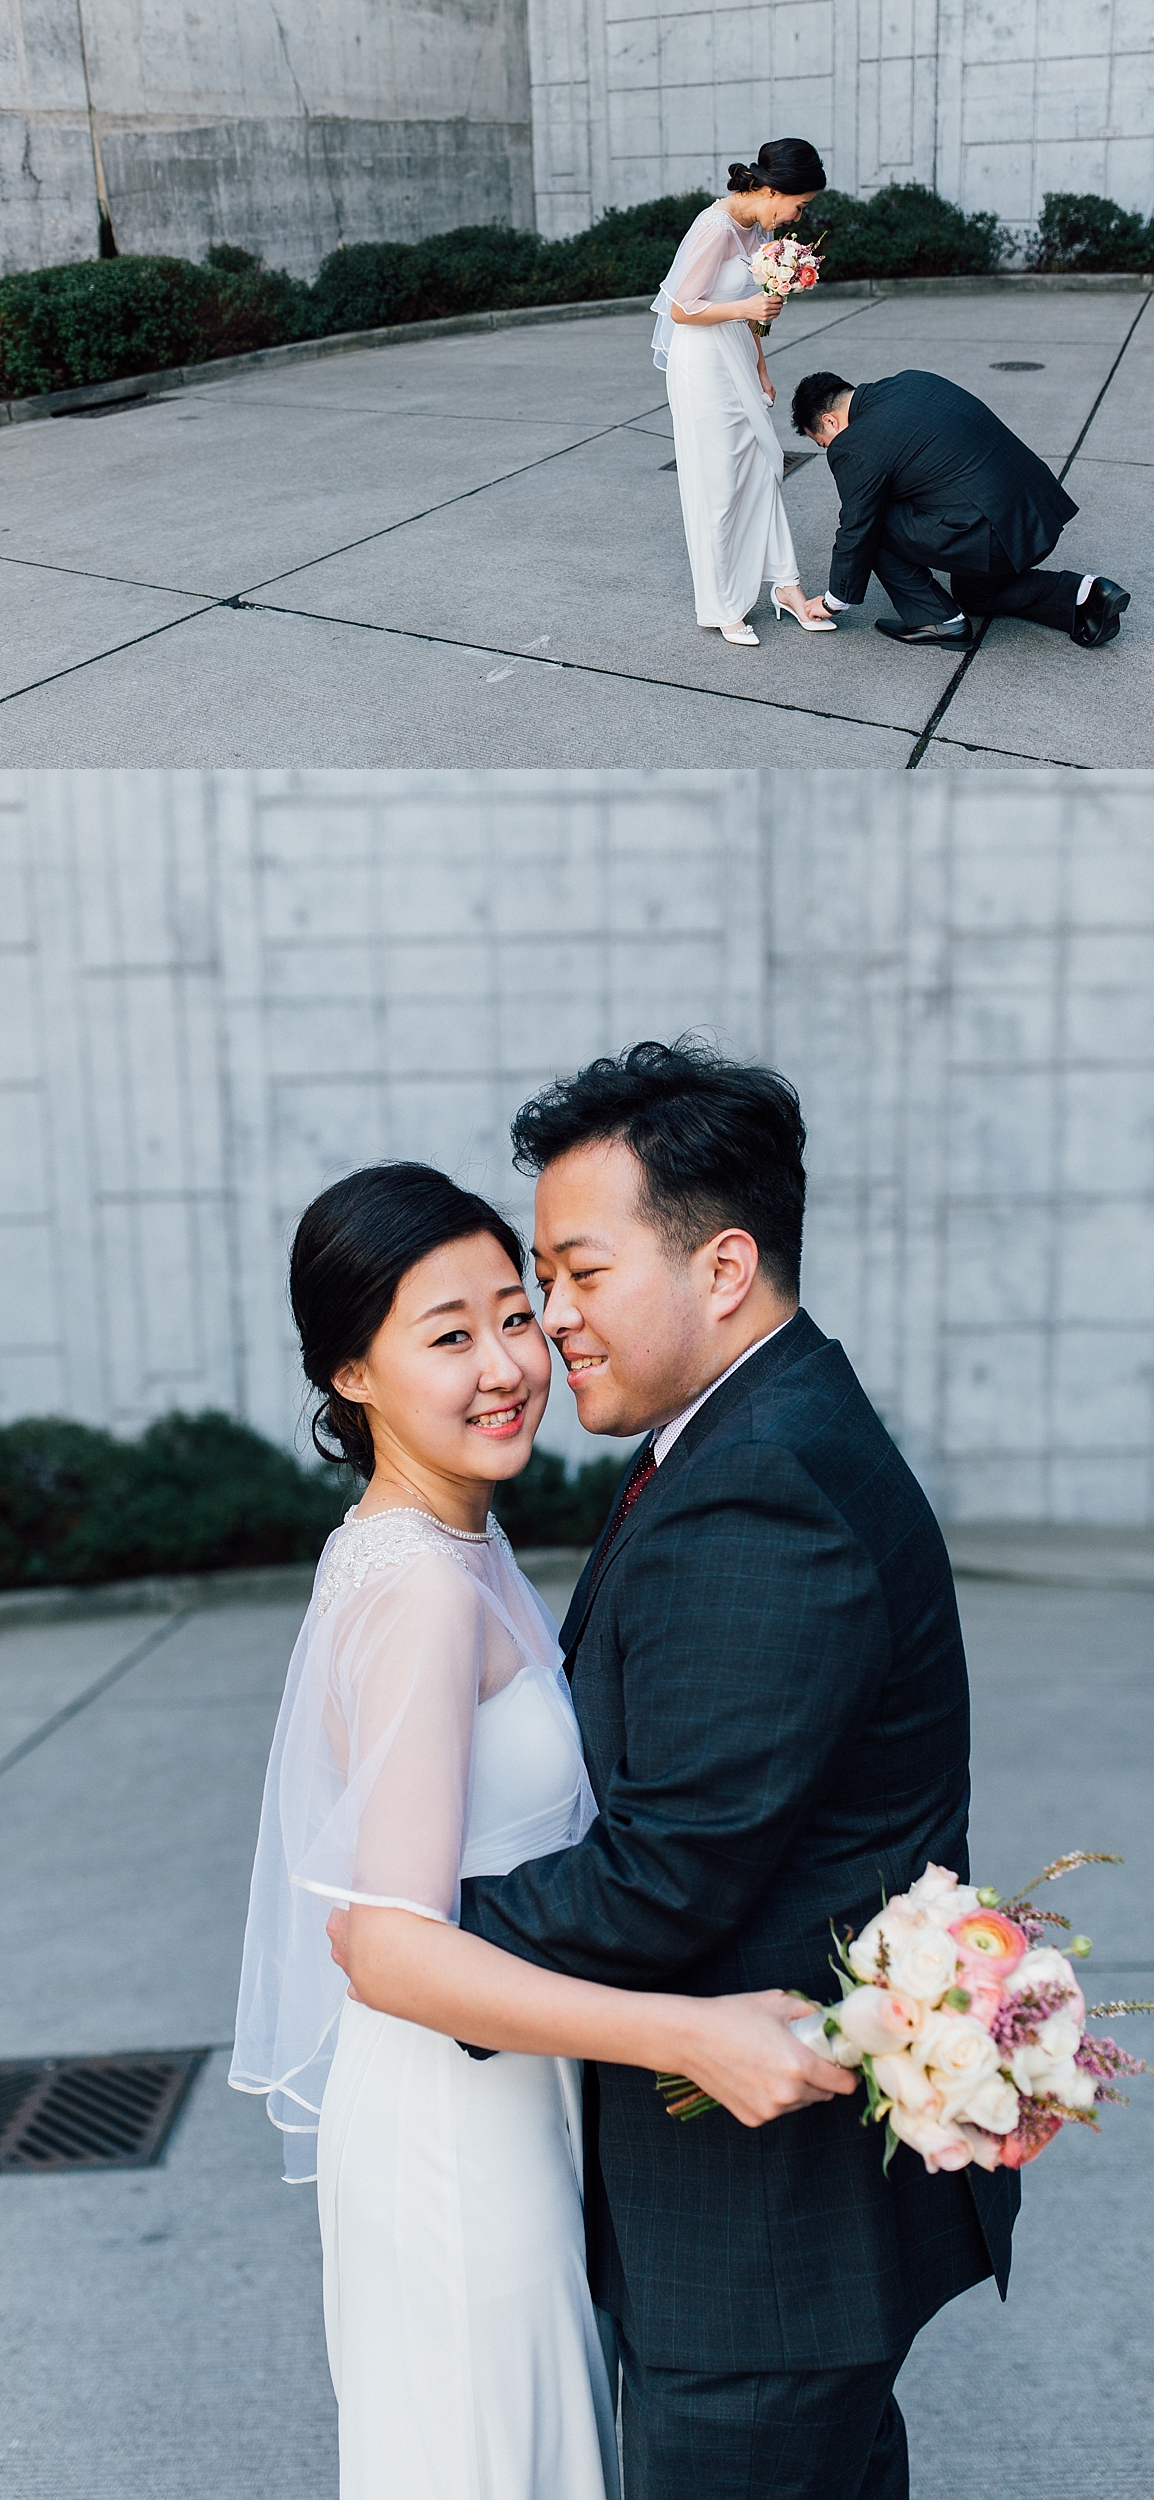 Seattle Courthouse Wedding Photographer PNW elopement Photography - Annie & Alan - Ashley Vos Photography-5.jpg